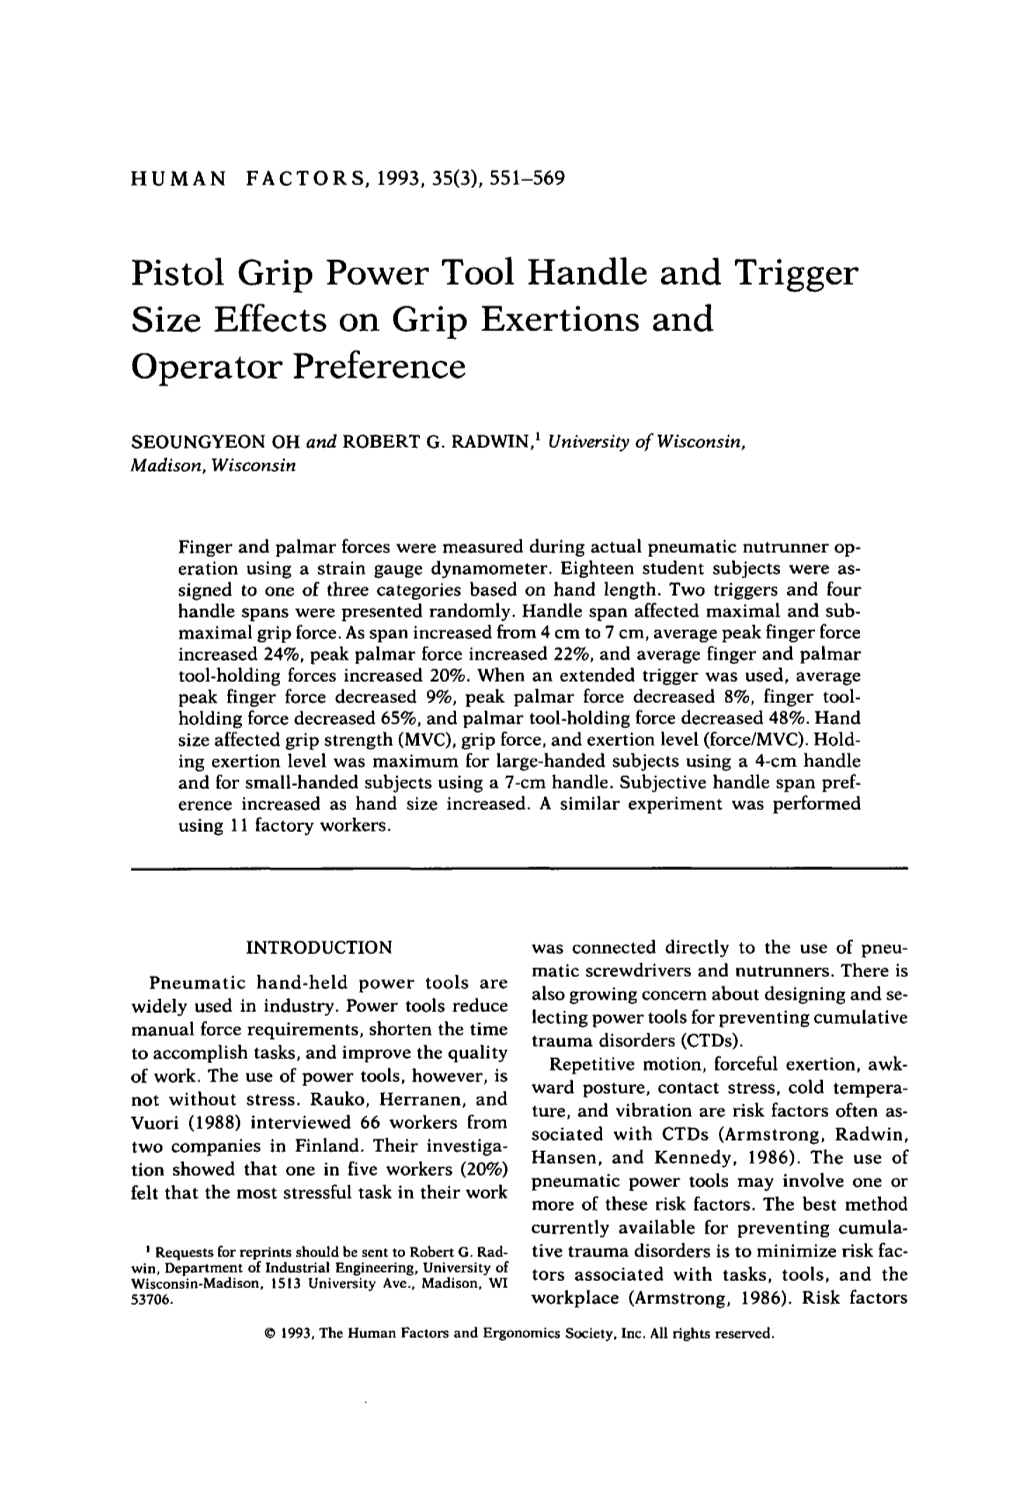 Pistol Grip Power Tool Handle and Trigger Size Effects on Grip Exertions and Opera Tor Preference